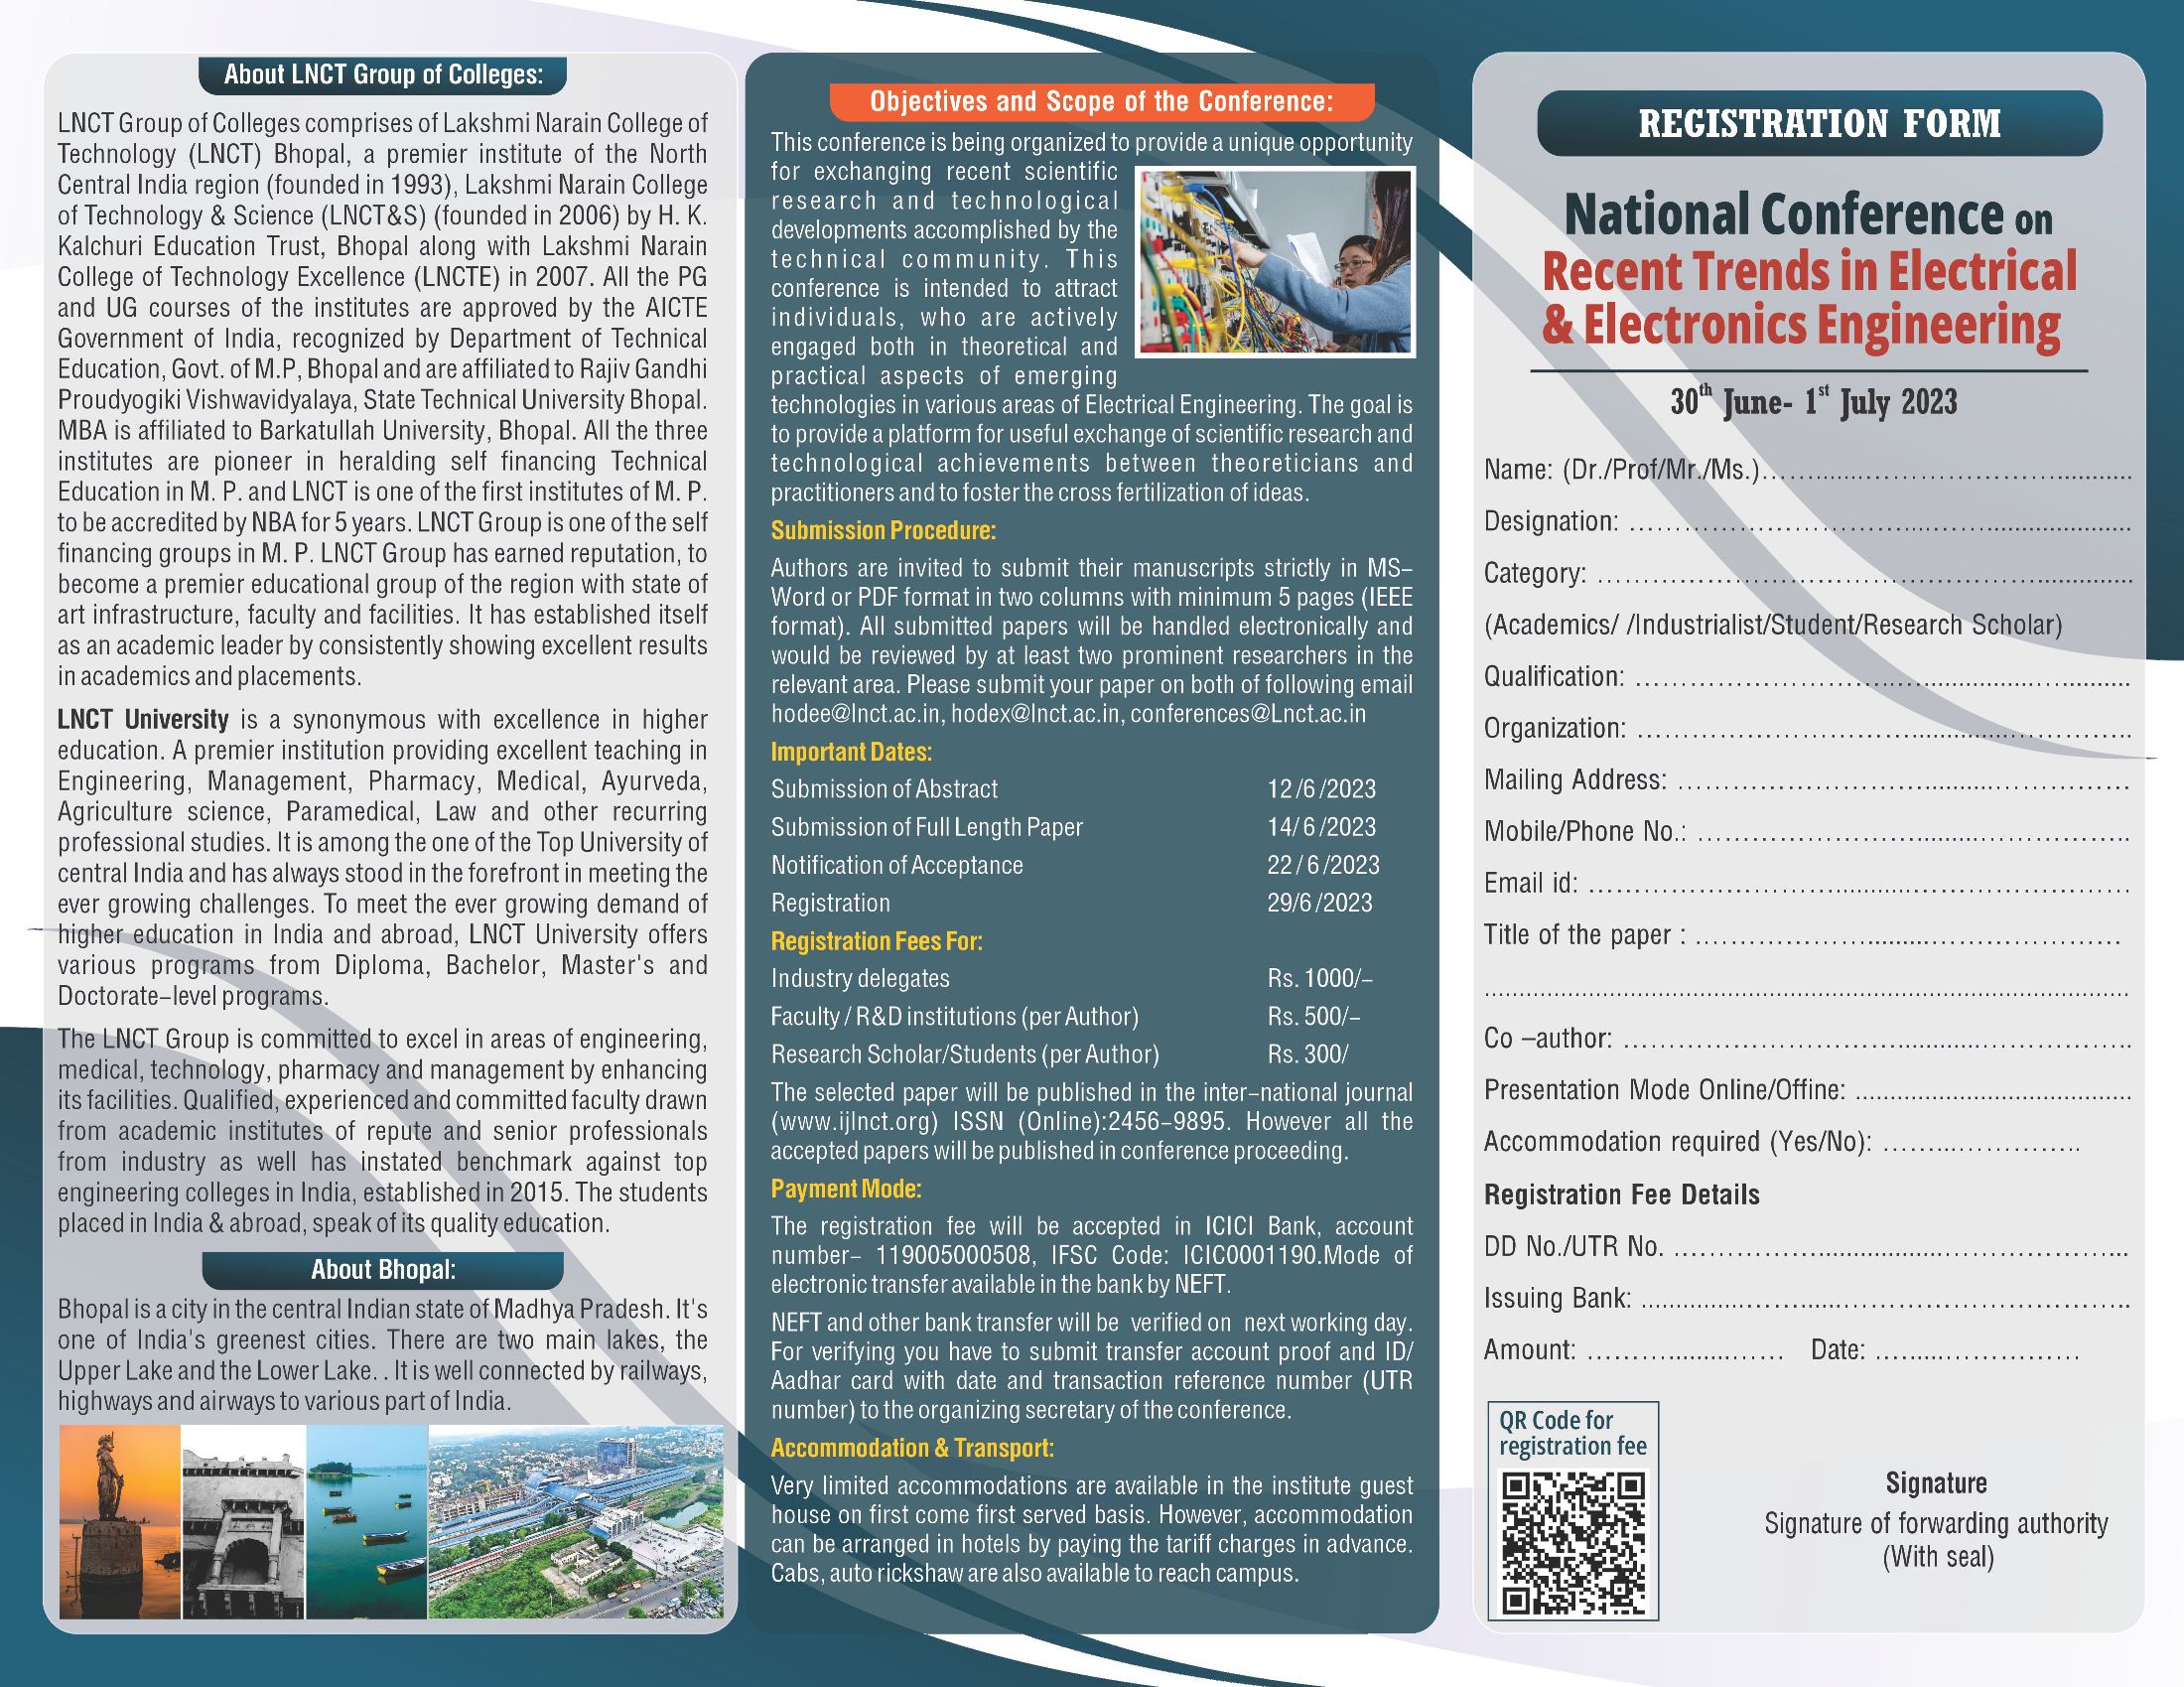 National Conference on Recent Trends in Electrical & Electronics Engineering 10